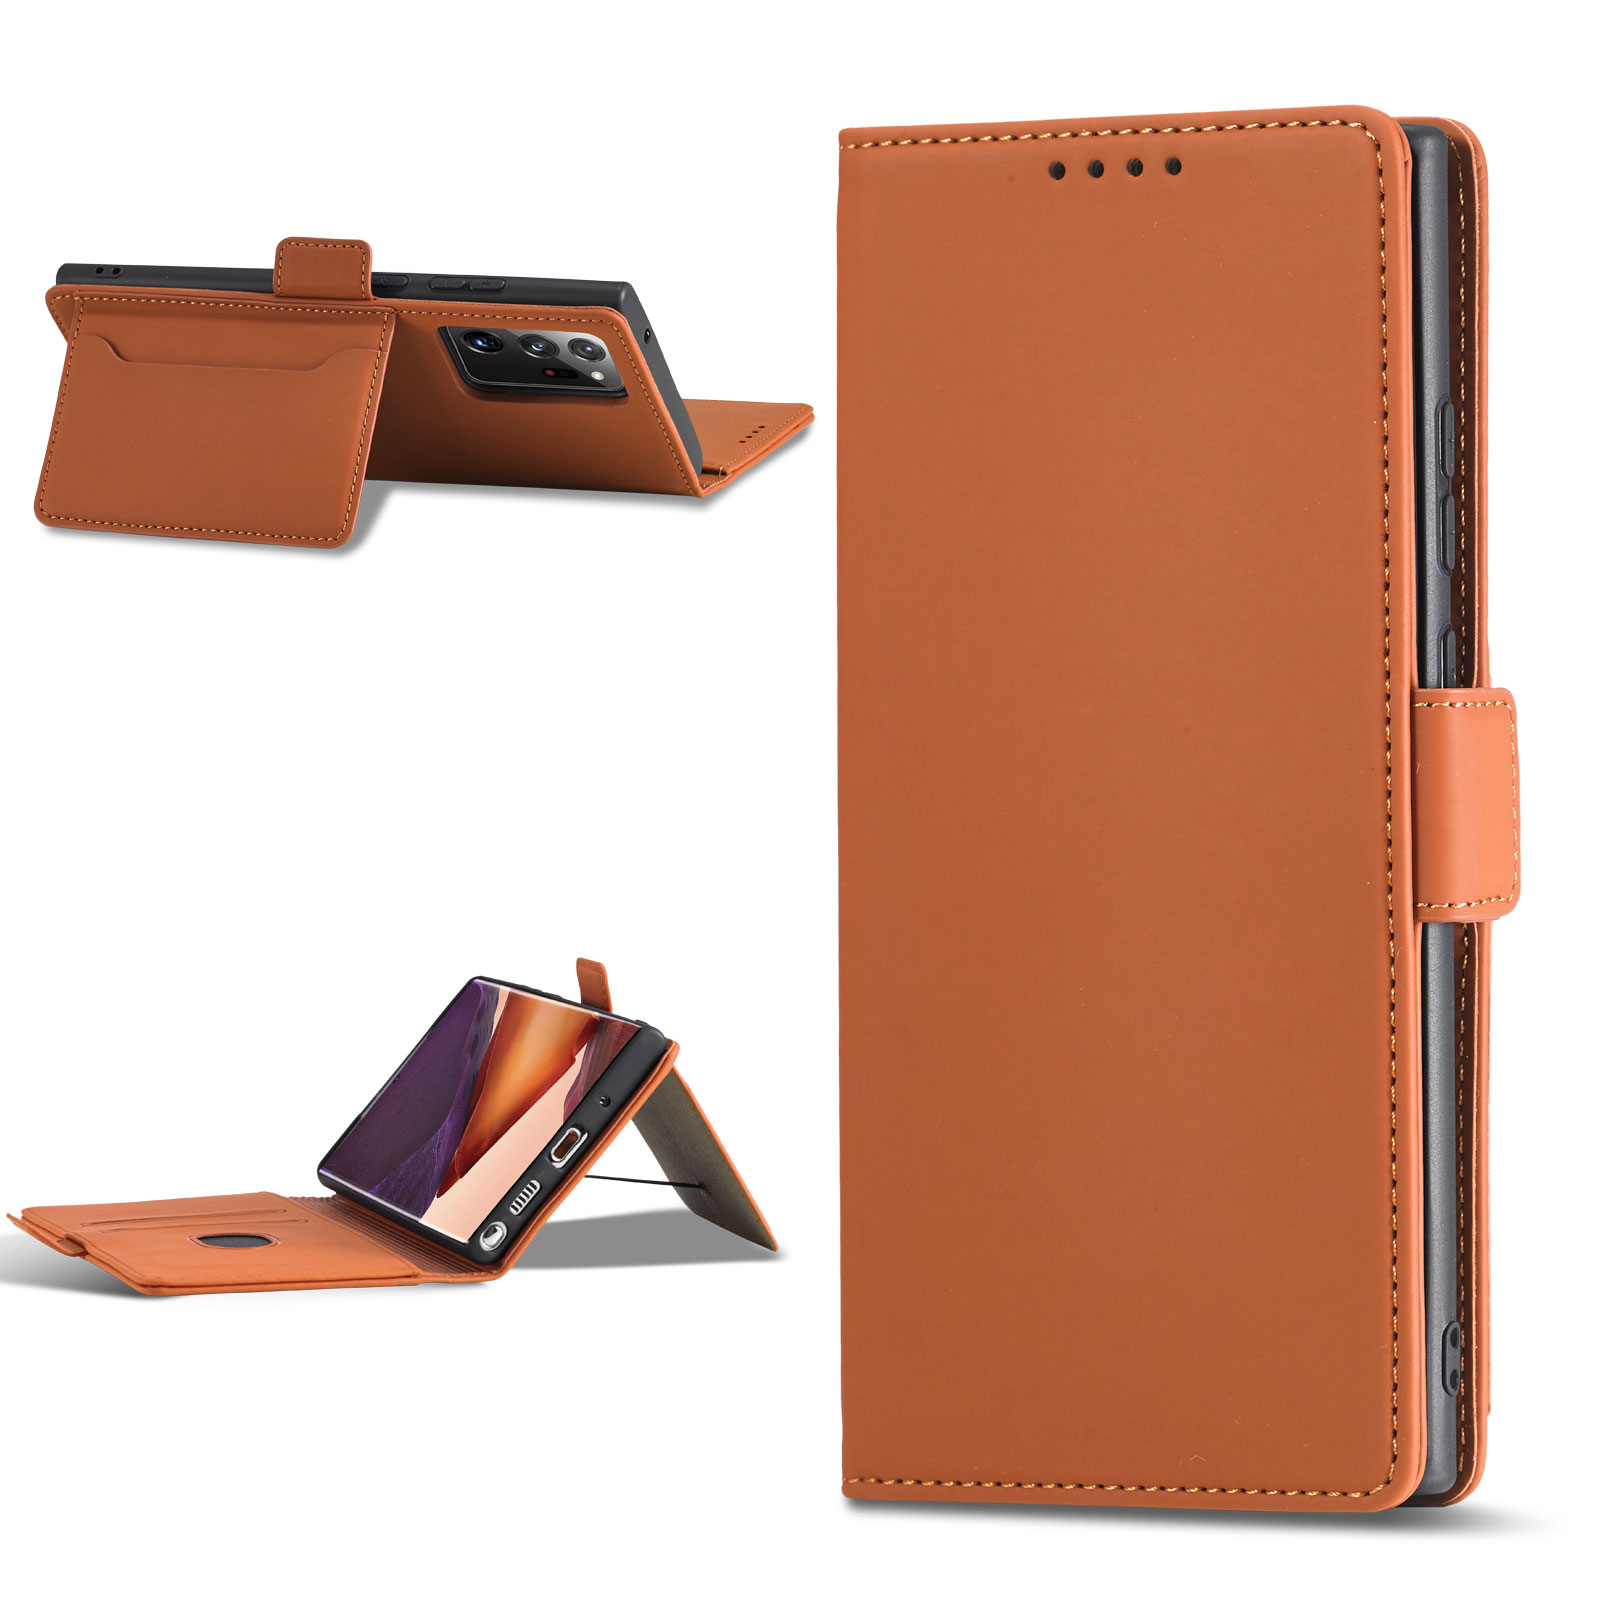 Bakeey-for-Samsung-Galaxy-Note-20-Case-Business-Flip-Magnetic-with-Multi-Card-Slots-Wallet-Shockproo-1763271-10